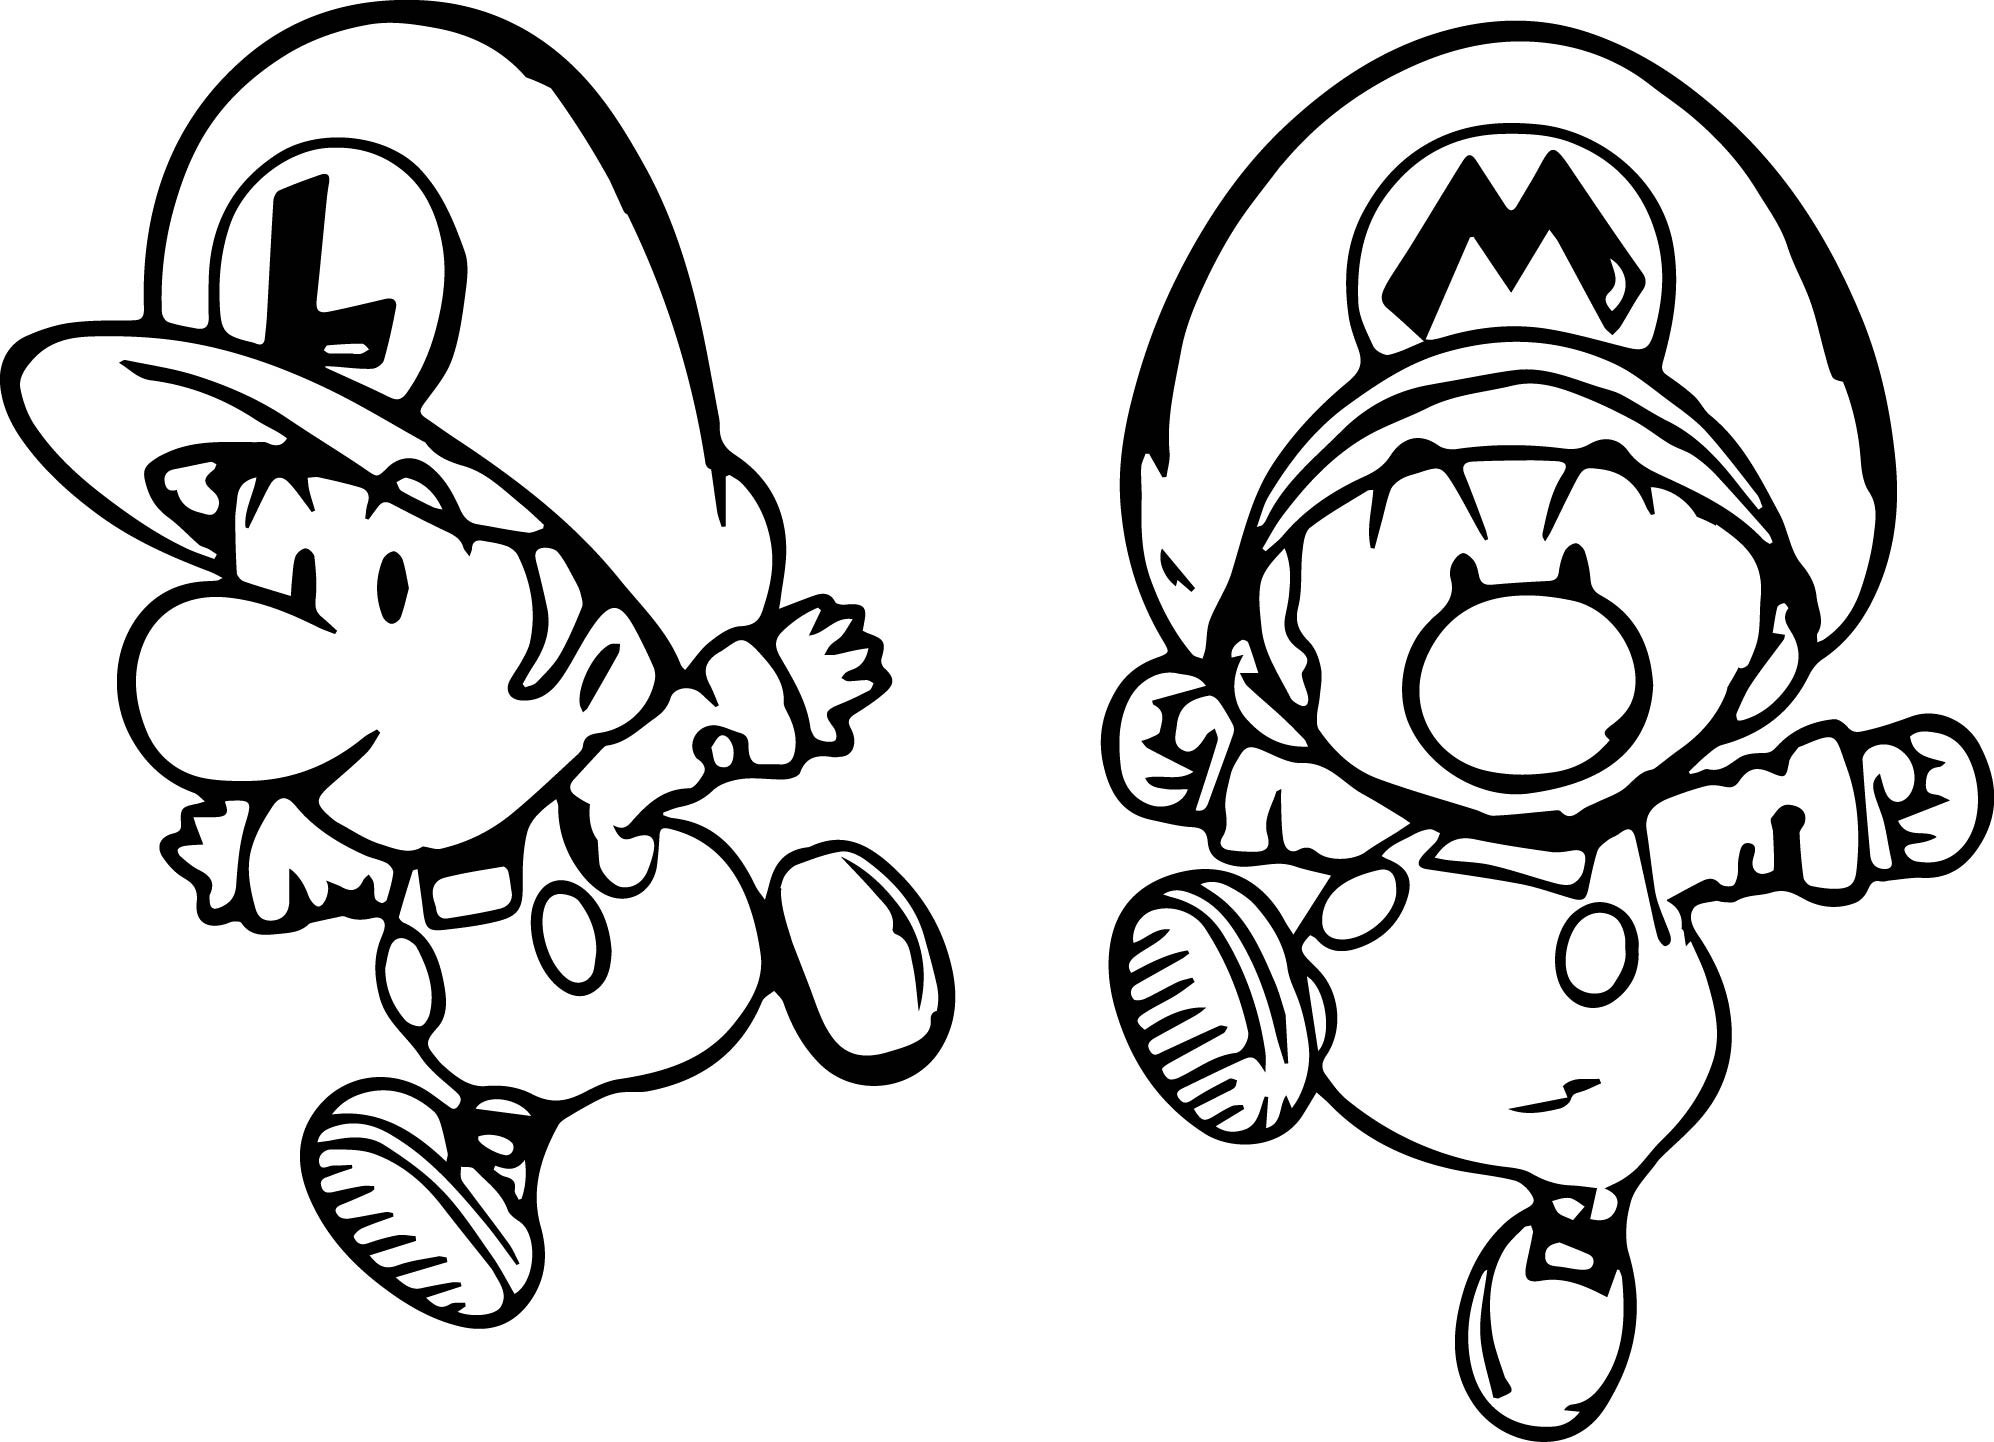 Baby Luigi Coloring Pages At Getcolorings.com | Free Printable